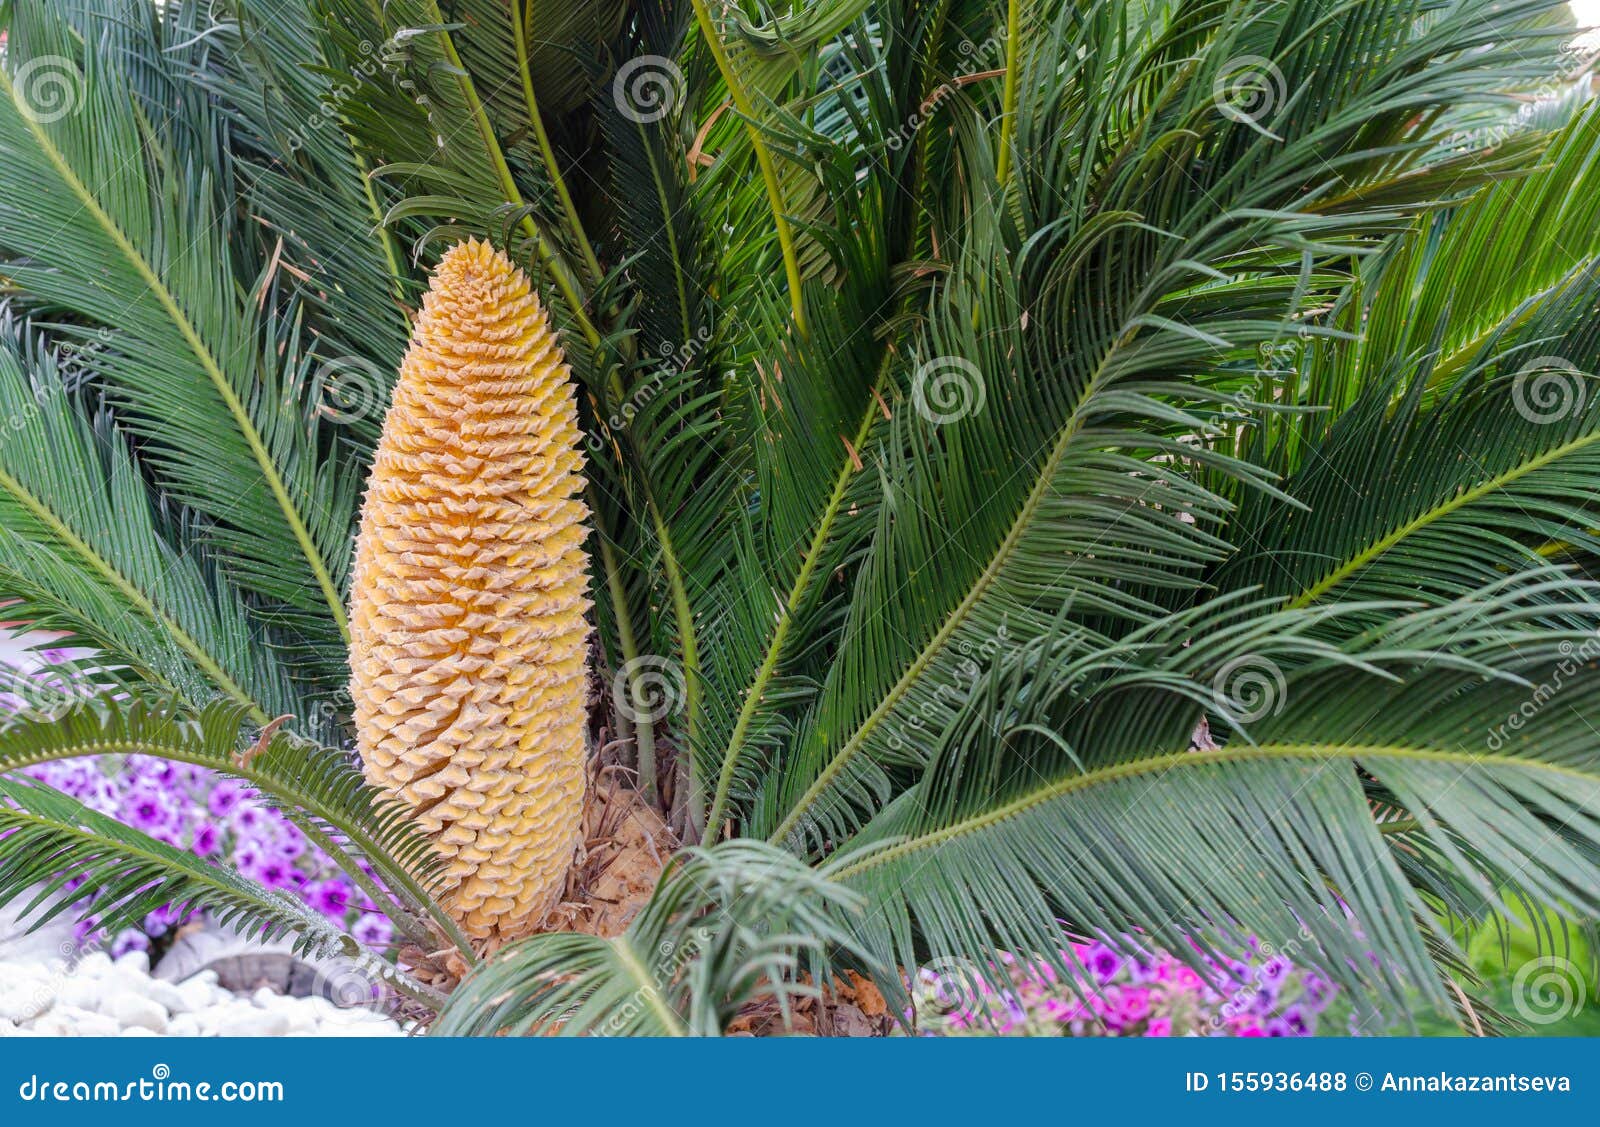 cycas revoluta male is a slow-growing tree with green leaves and drupe that contains the seeds.  sago palm, turkey, belek